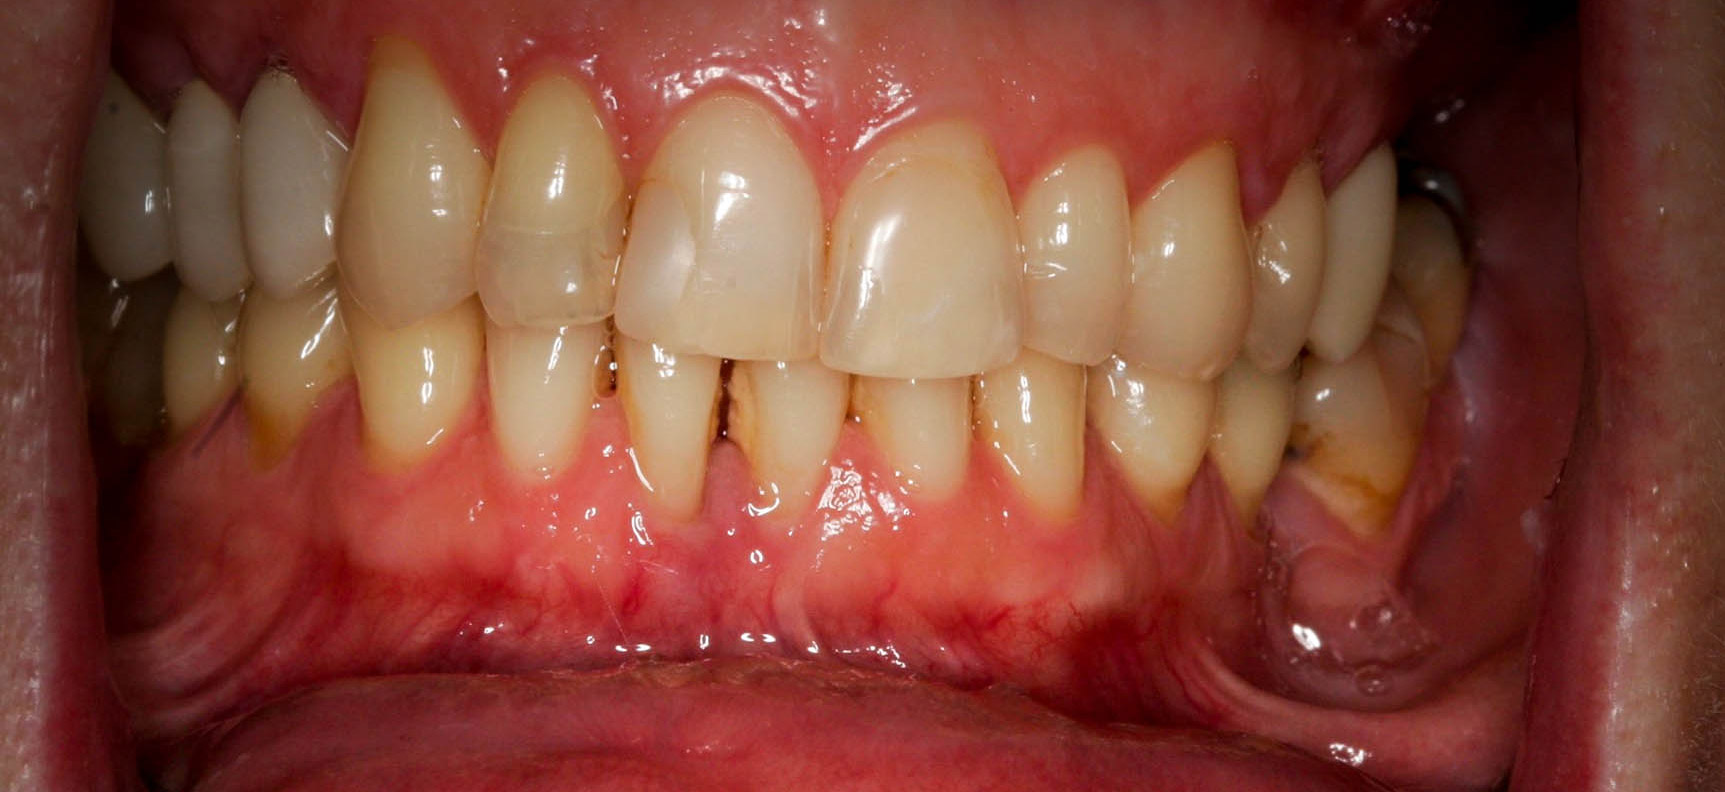 Esthetic makeover using veneers, crowns and bridges - the Before photo